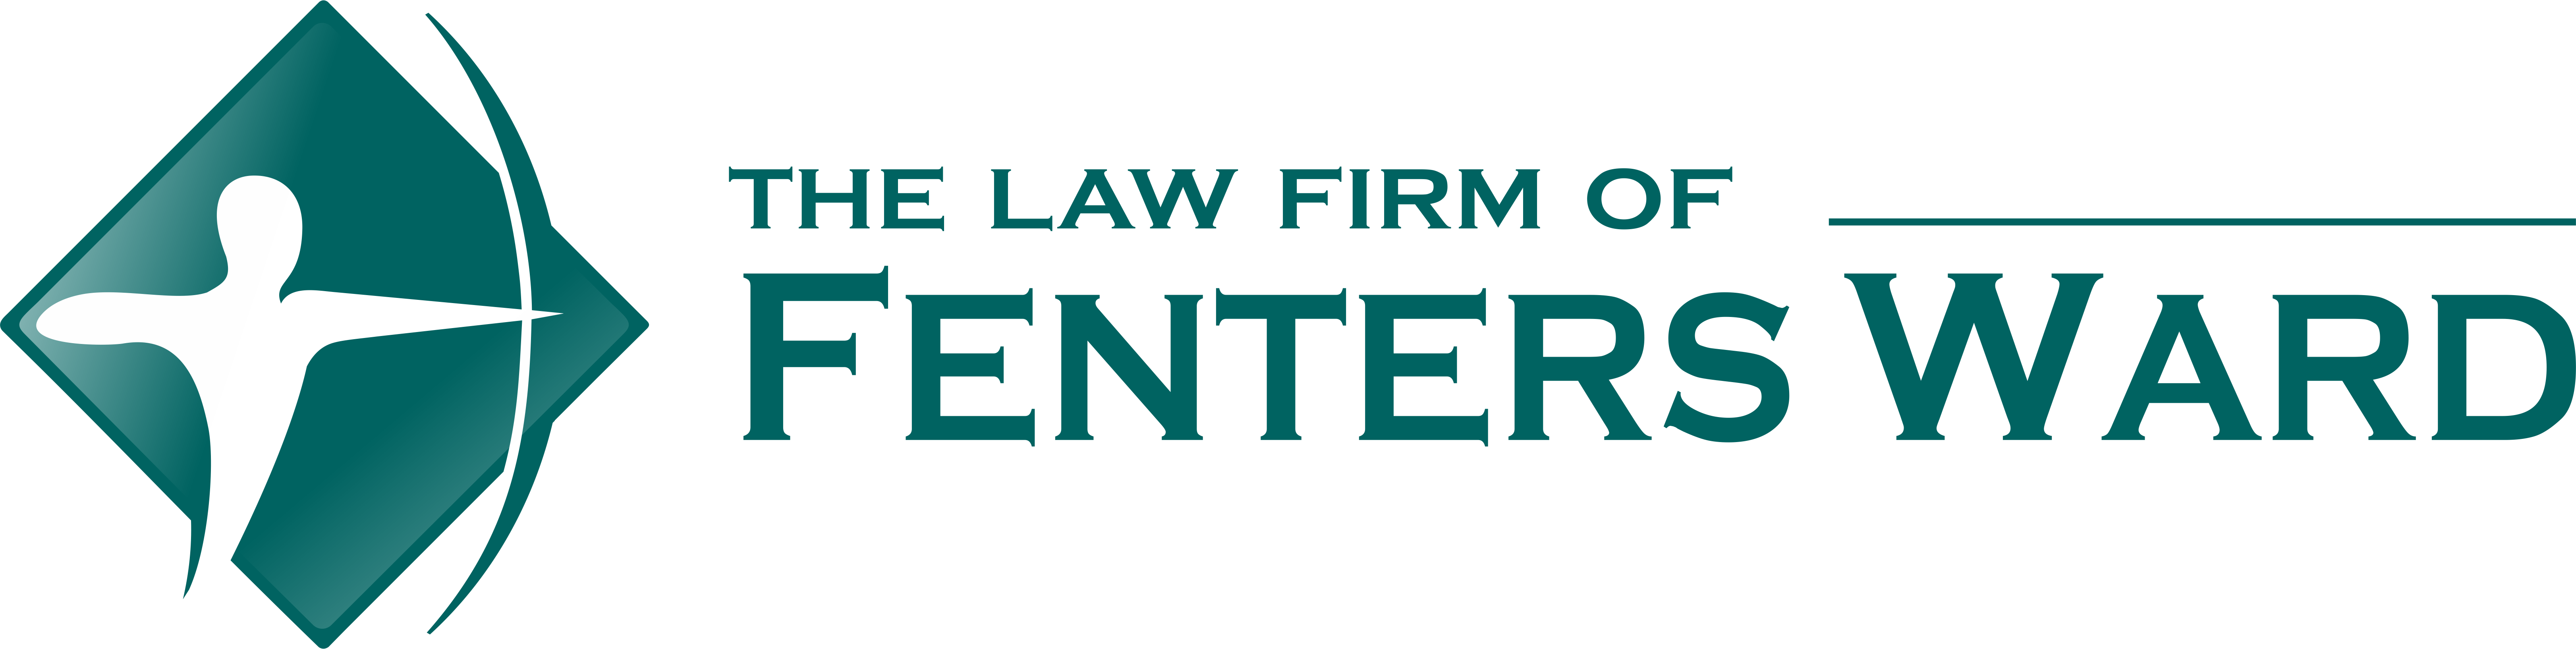 The Law Firm of Fenters Ward Shares Helpful Information About Personal Injury Cases In Pennsylvania